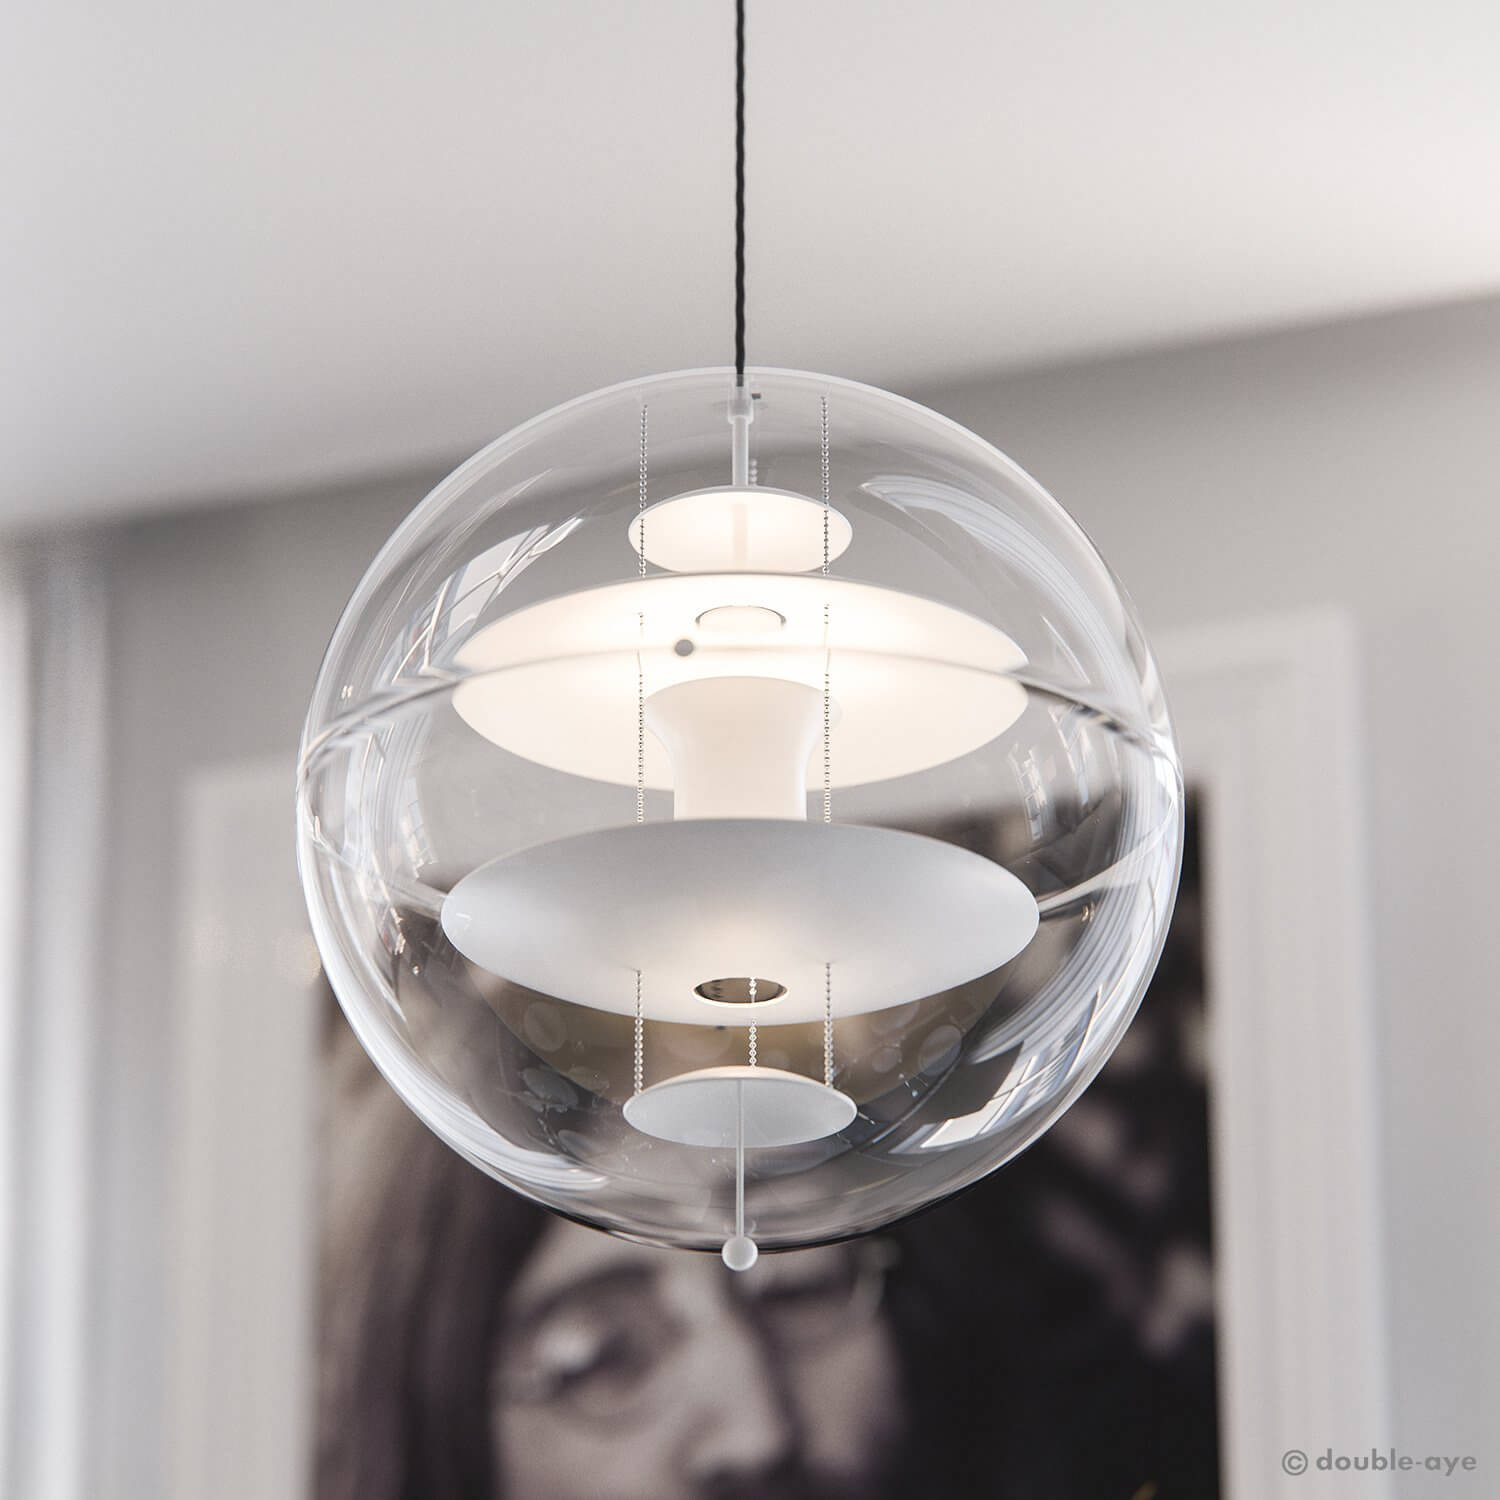 The apple apartments dining room glass ceiling lamp - cgi visualization